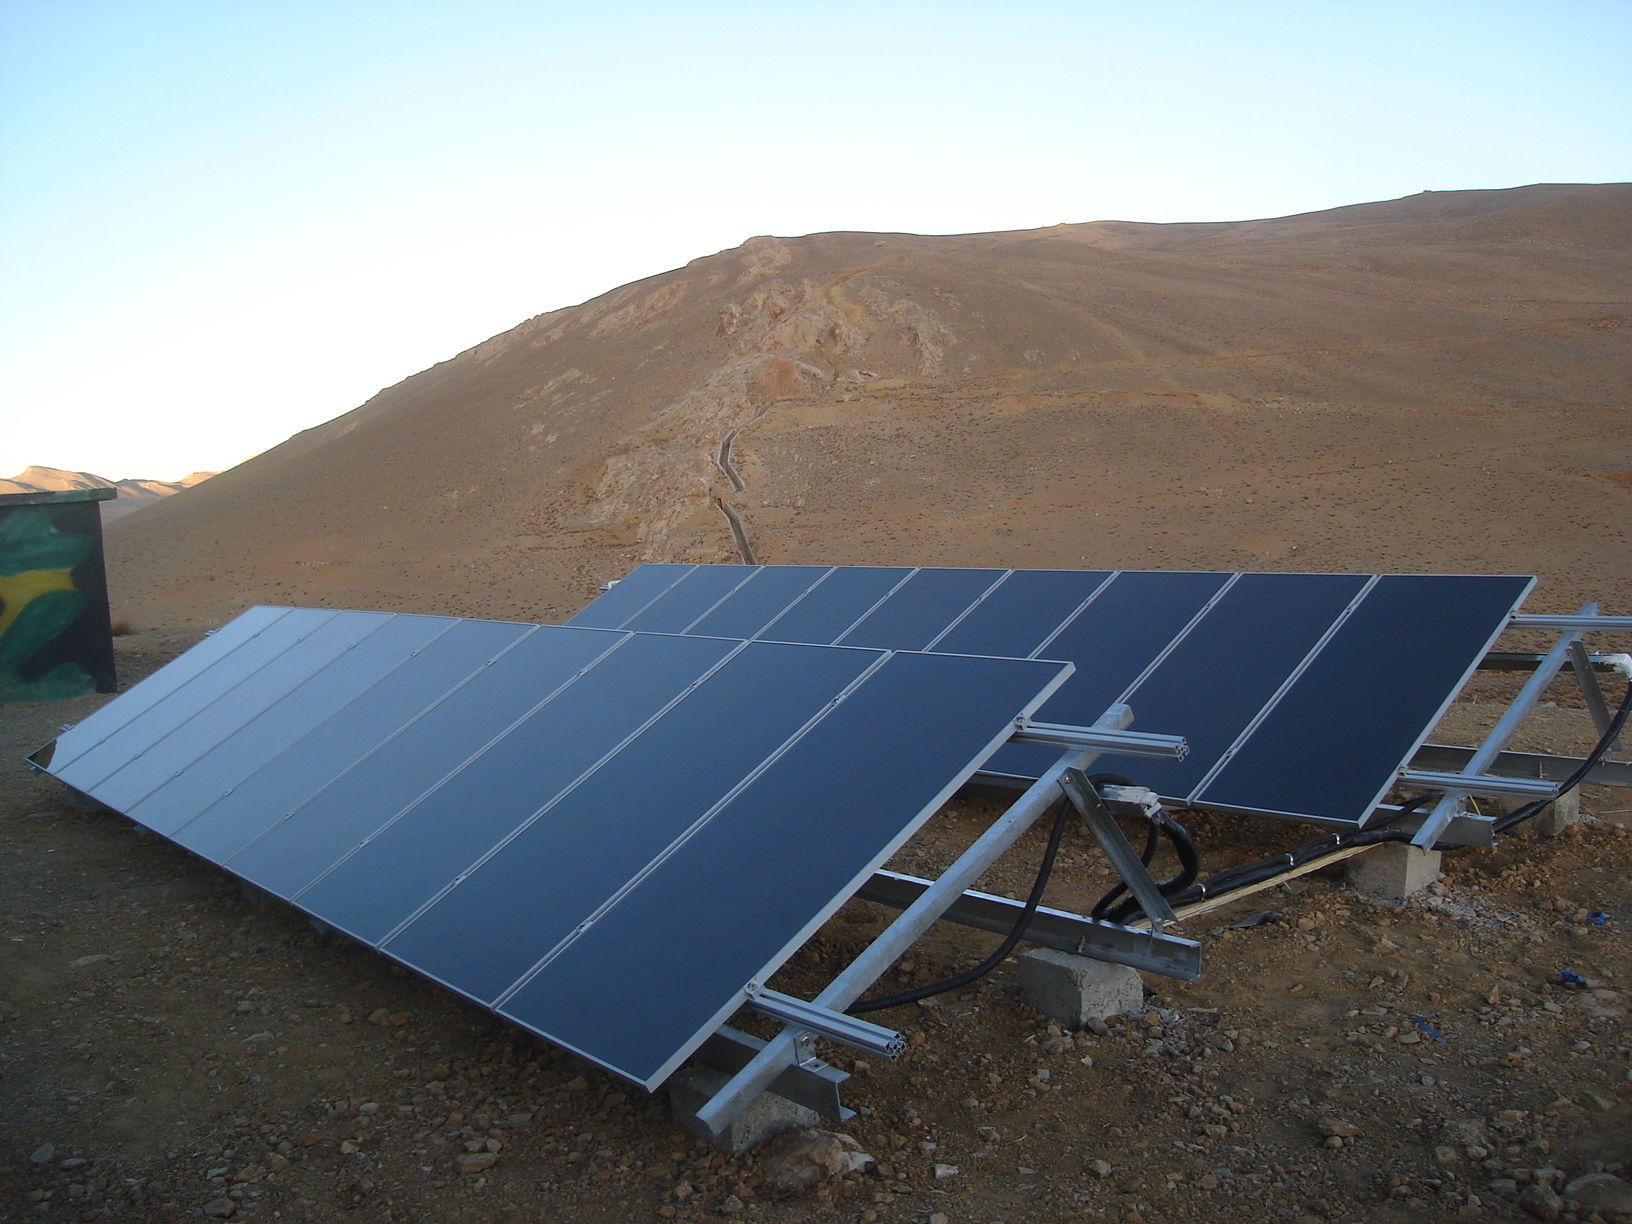 Photovoltaic power generation project at Lhasa border post in Tibet